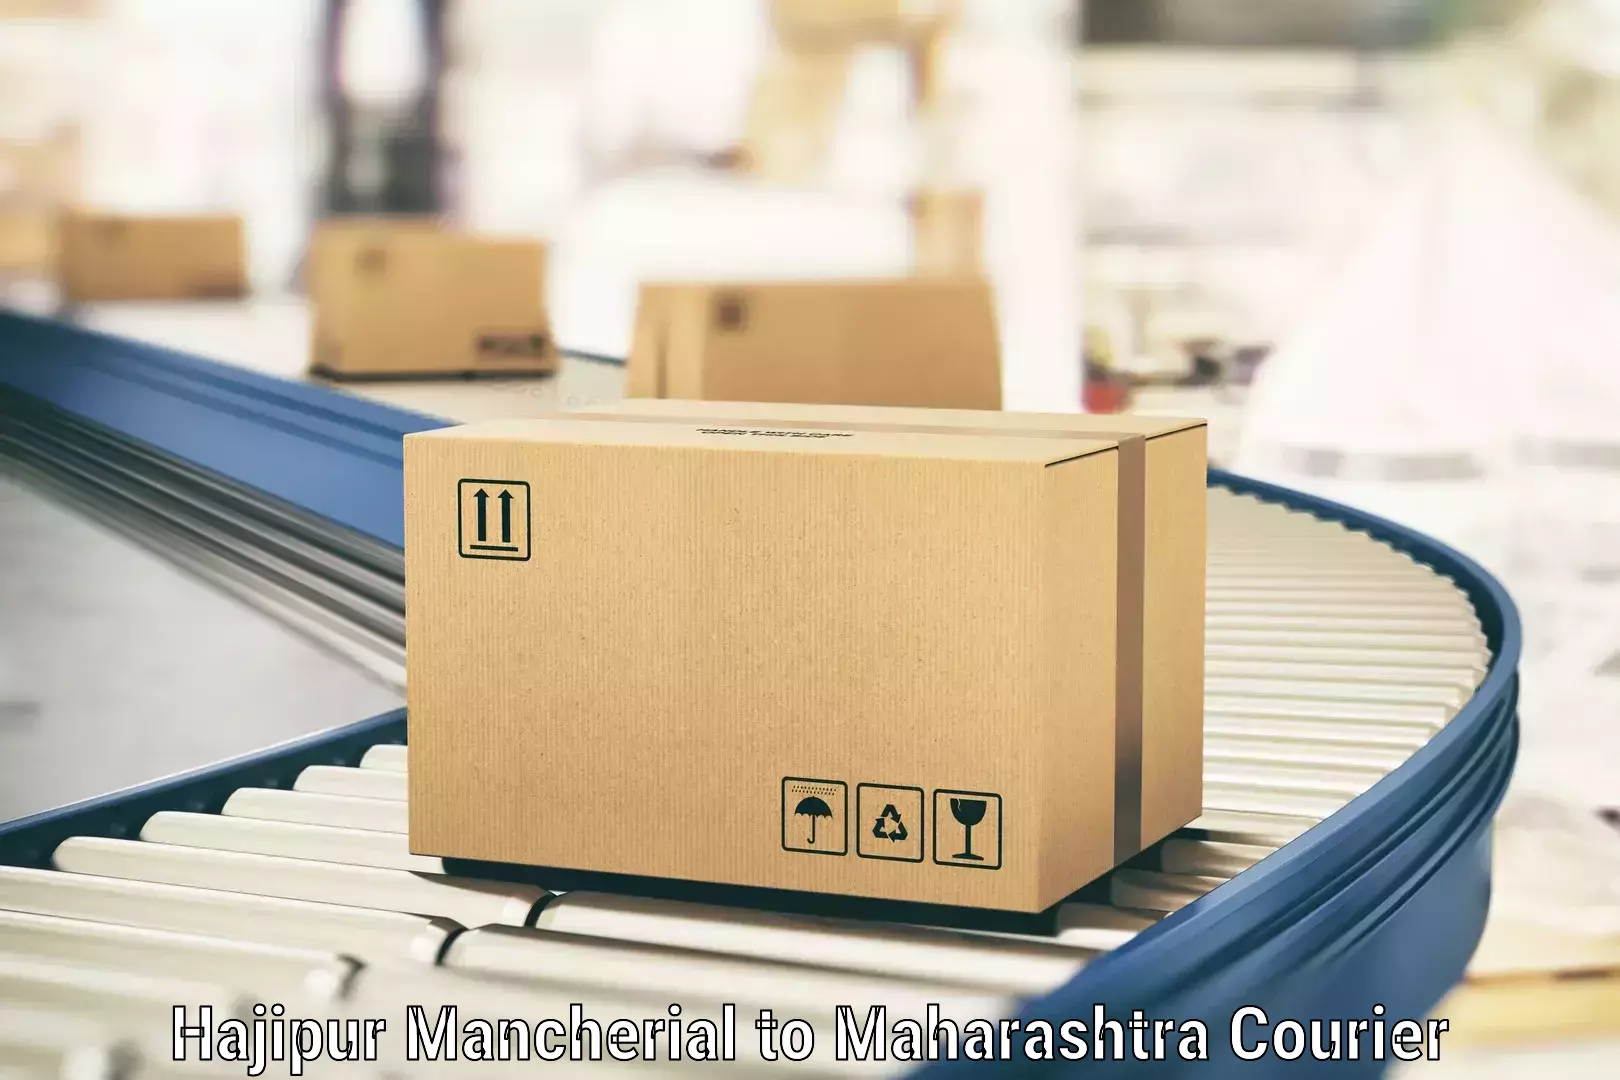 Multi-city courier Hajipur Mancherial to Lonikand